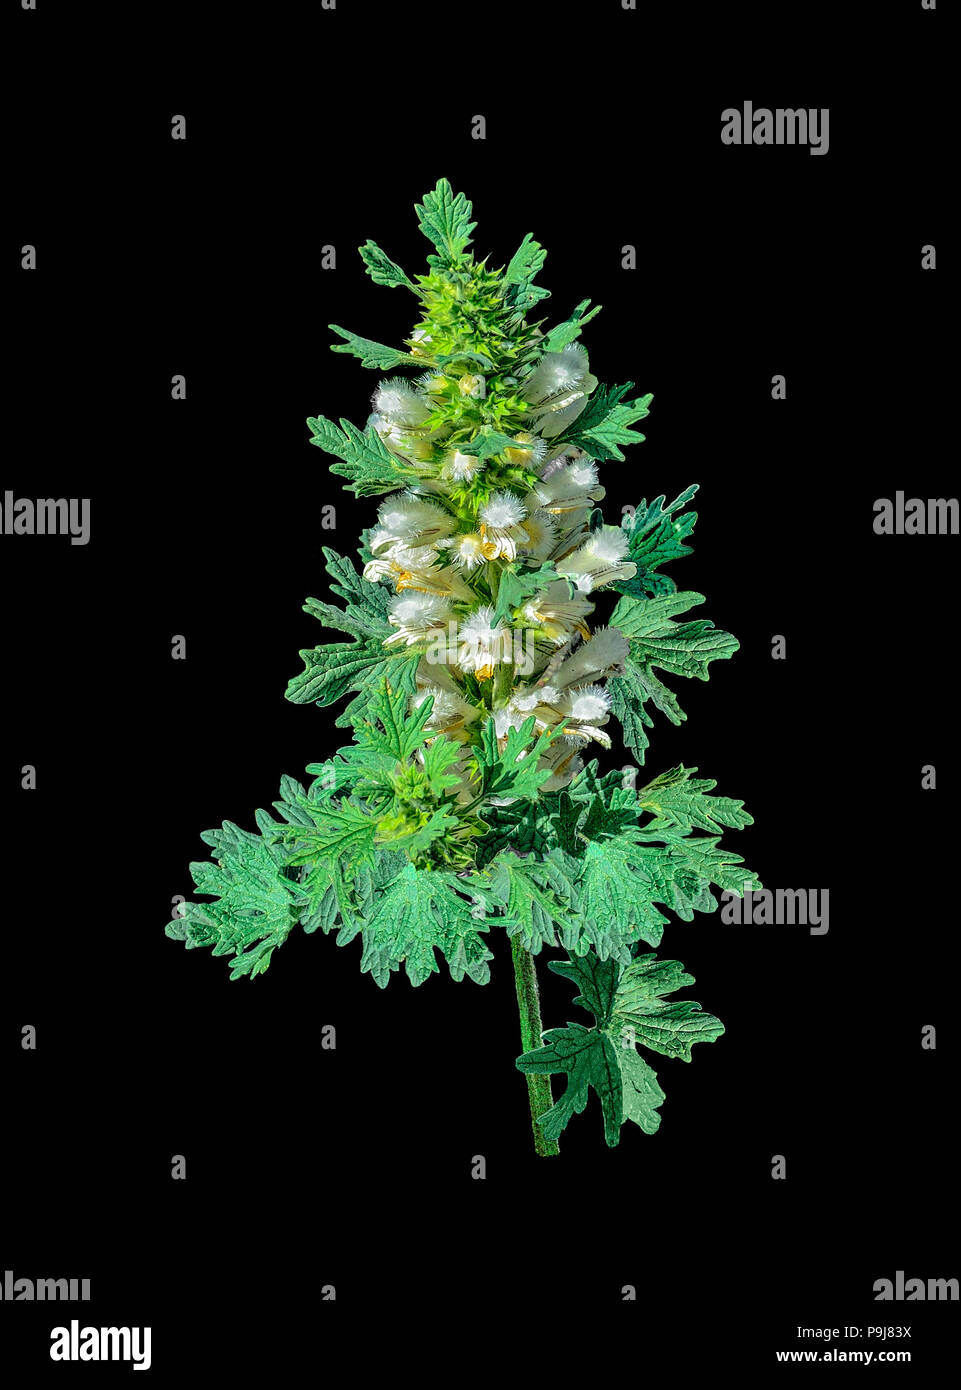 Blooming motherwort or Leonurus cardiaca - medicinal plant on a black background isolated. Other names: throw-wort, lion's ear, and lion's tail, raw m Stock Photo